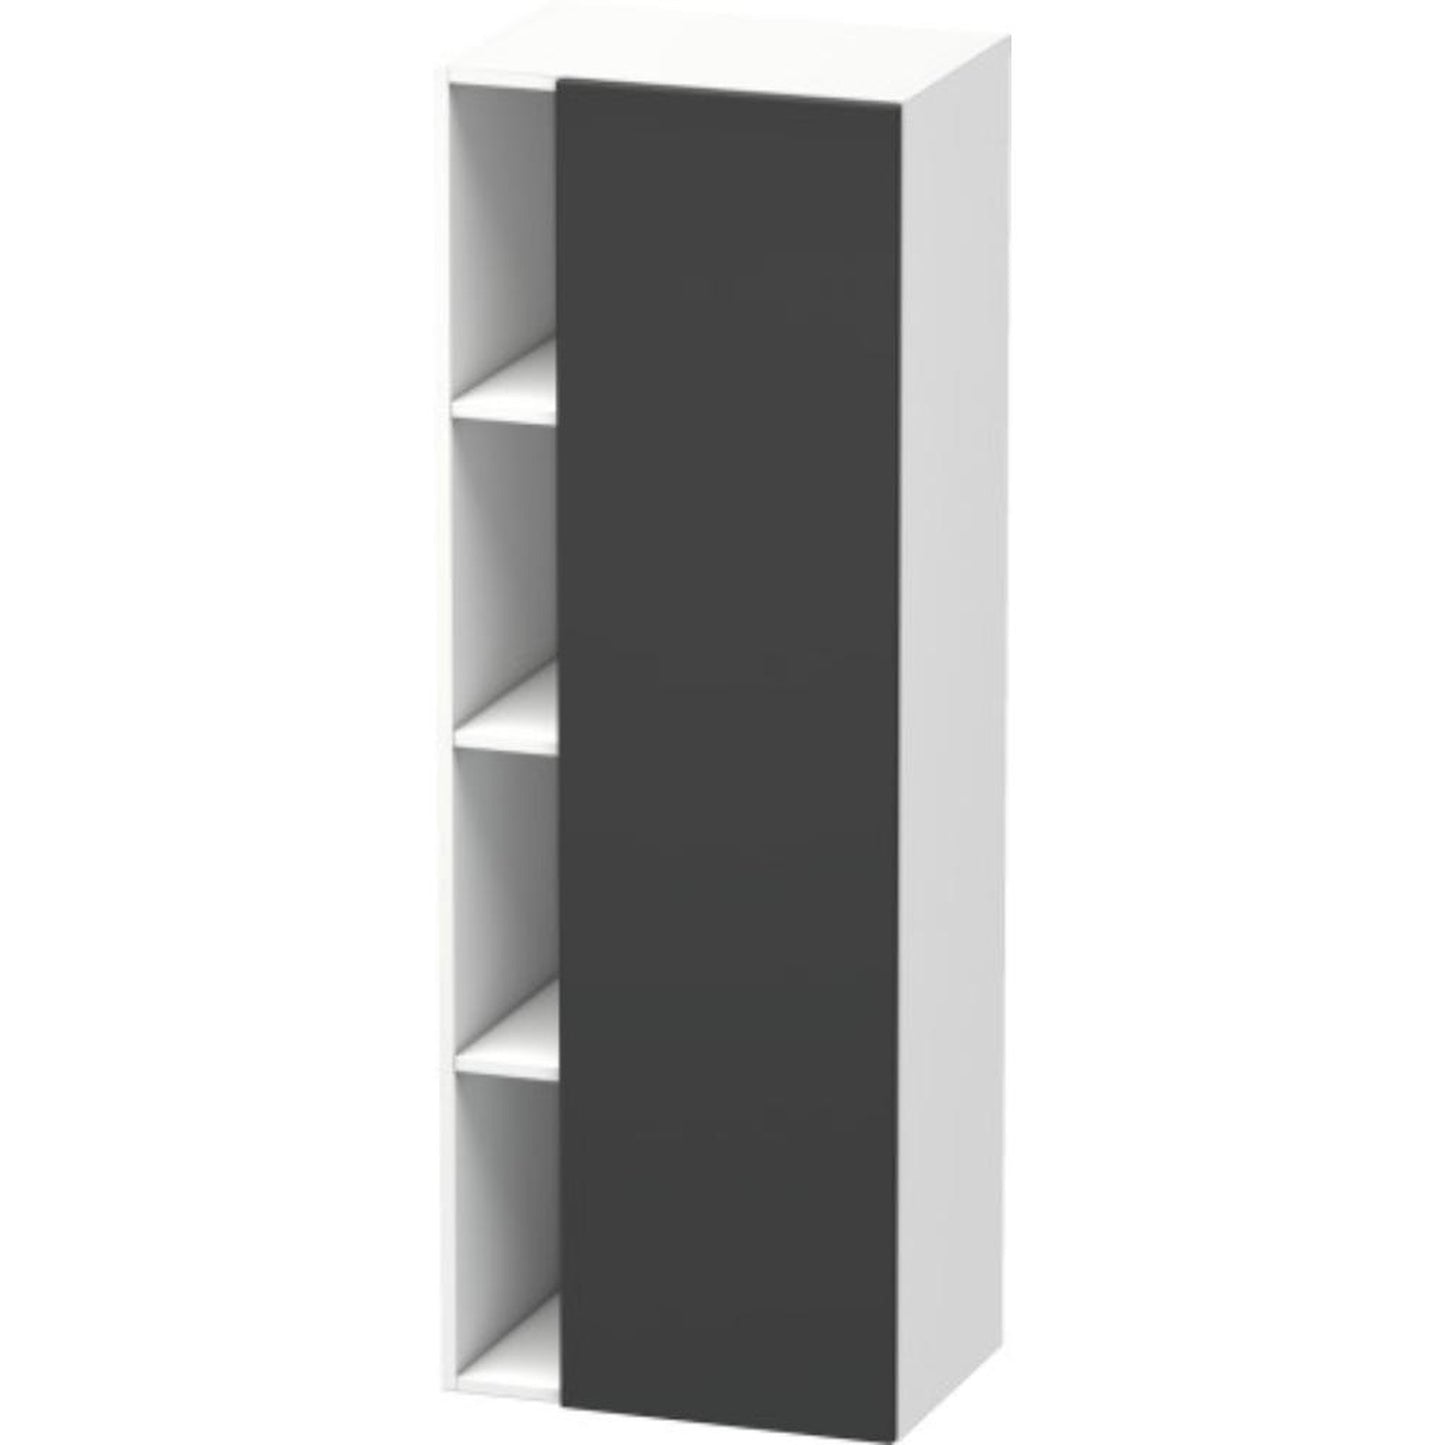 Duravit DuraStyle 20" x 55" x 14" Tall Cabinet With Right Hinge One Door in Graphite and White (DS1239R4918)